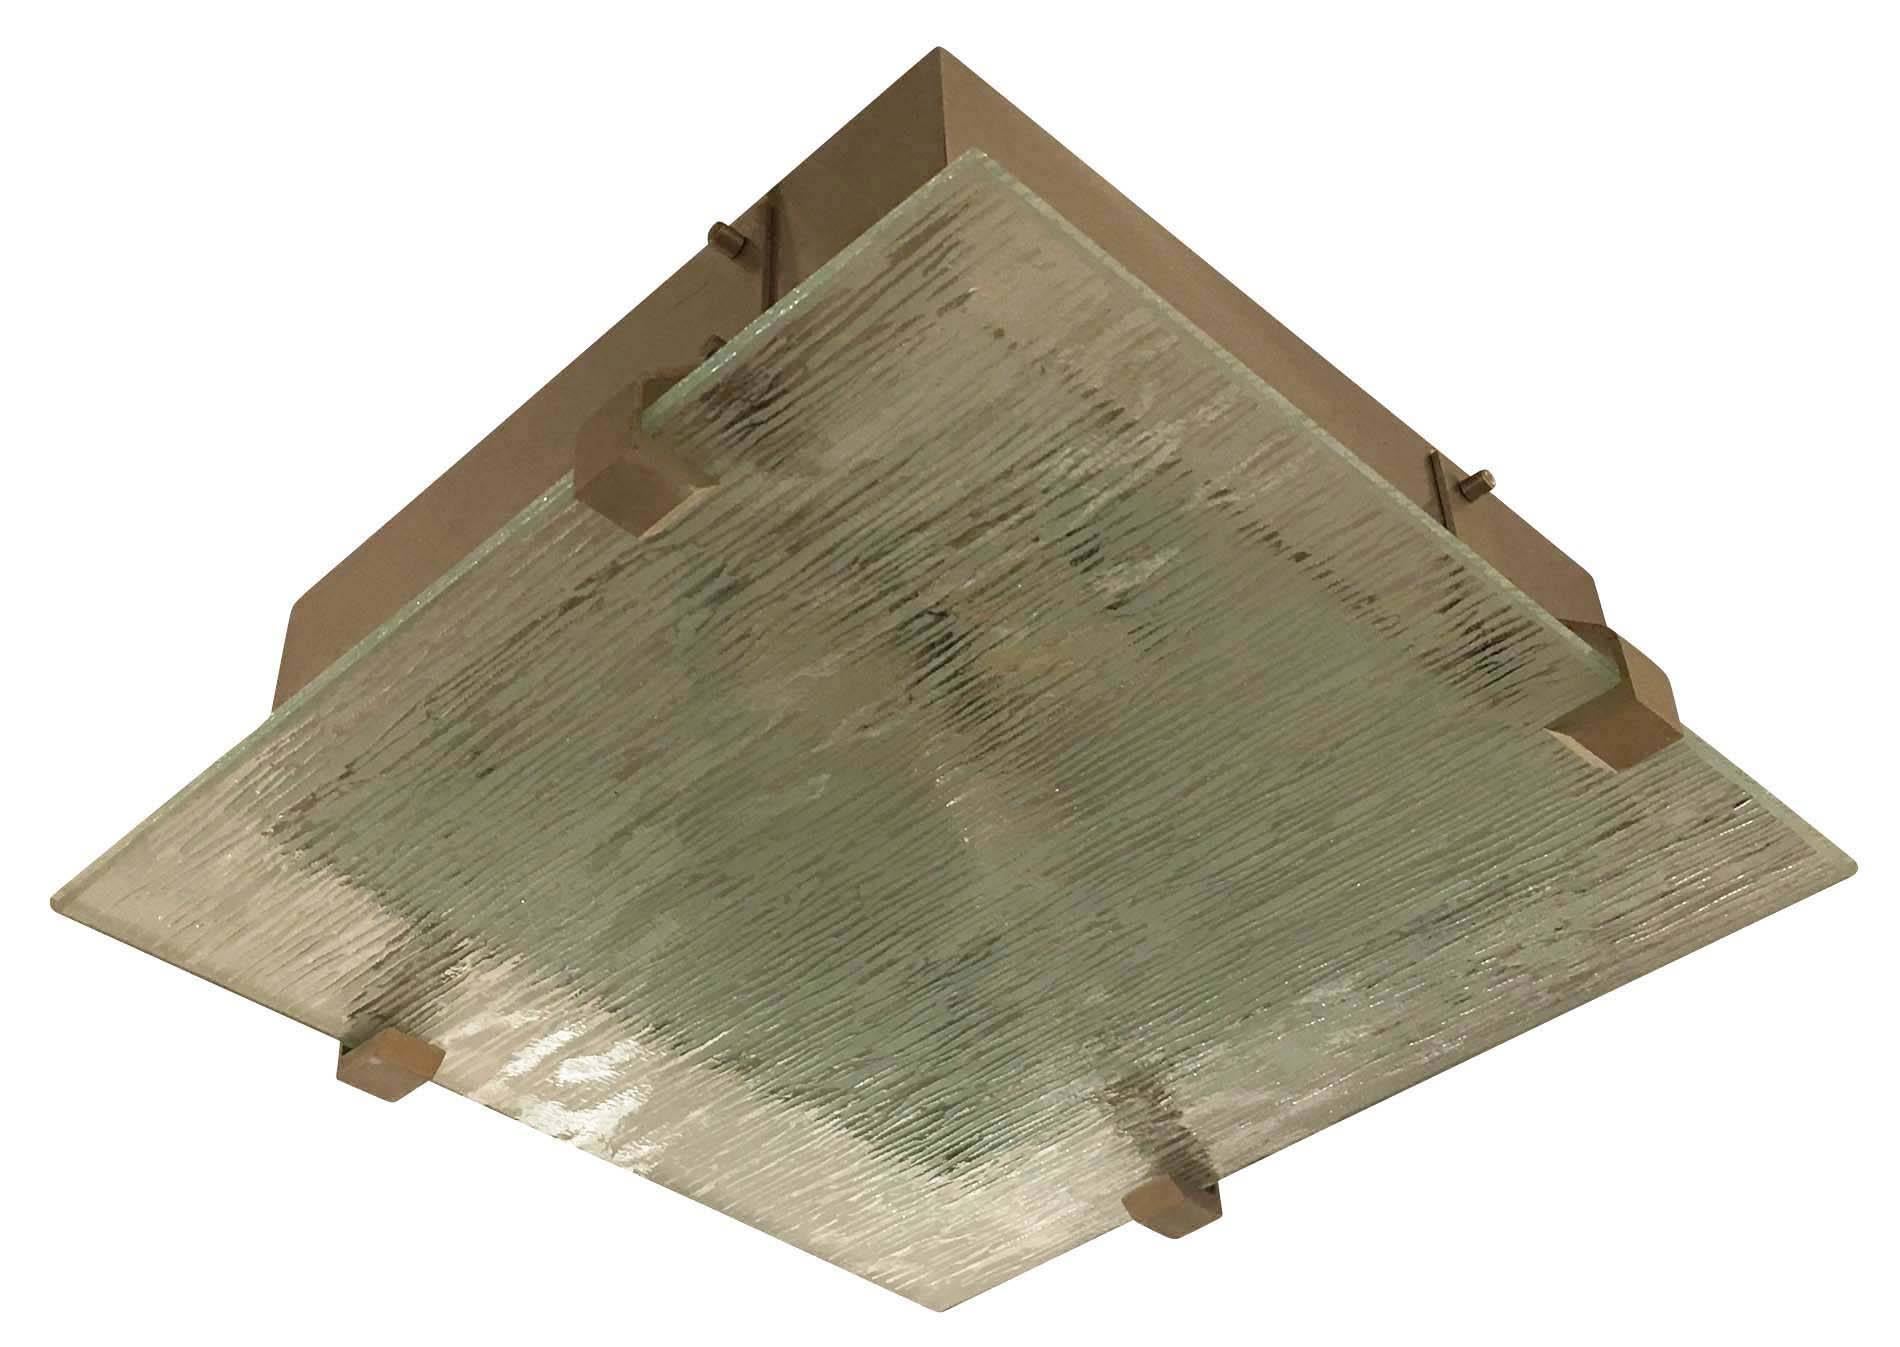 Pair of 1960s Italian flush mounts each featuring a beautifully crafted etched square glass. The glass has a slight aqua tint as typically seen in Mid-Century glass. The hardware is brushed nickel and each holds three sockets. Price per item.
